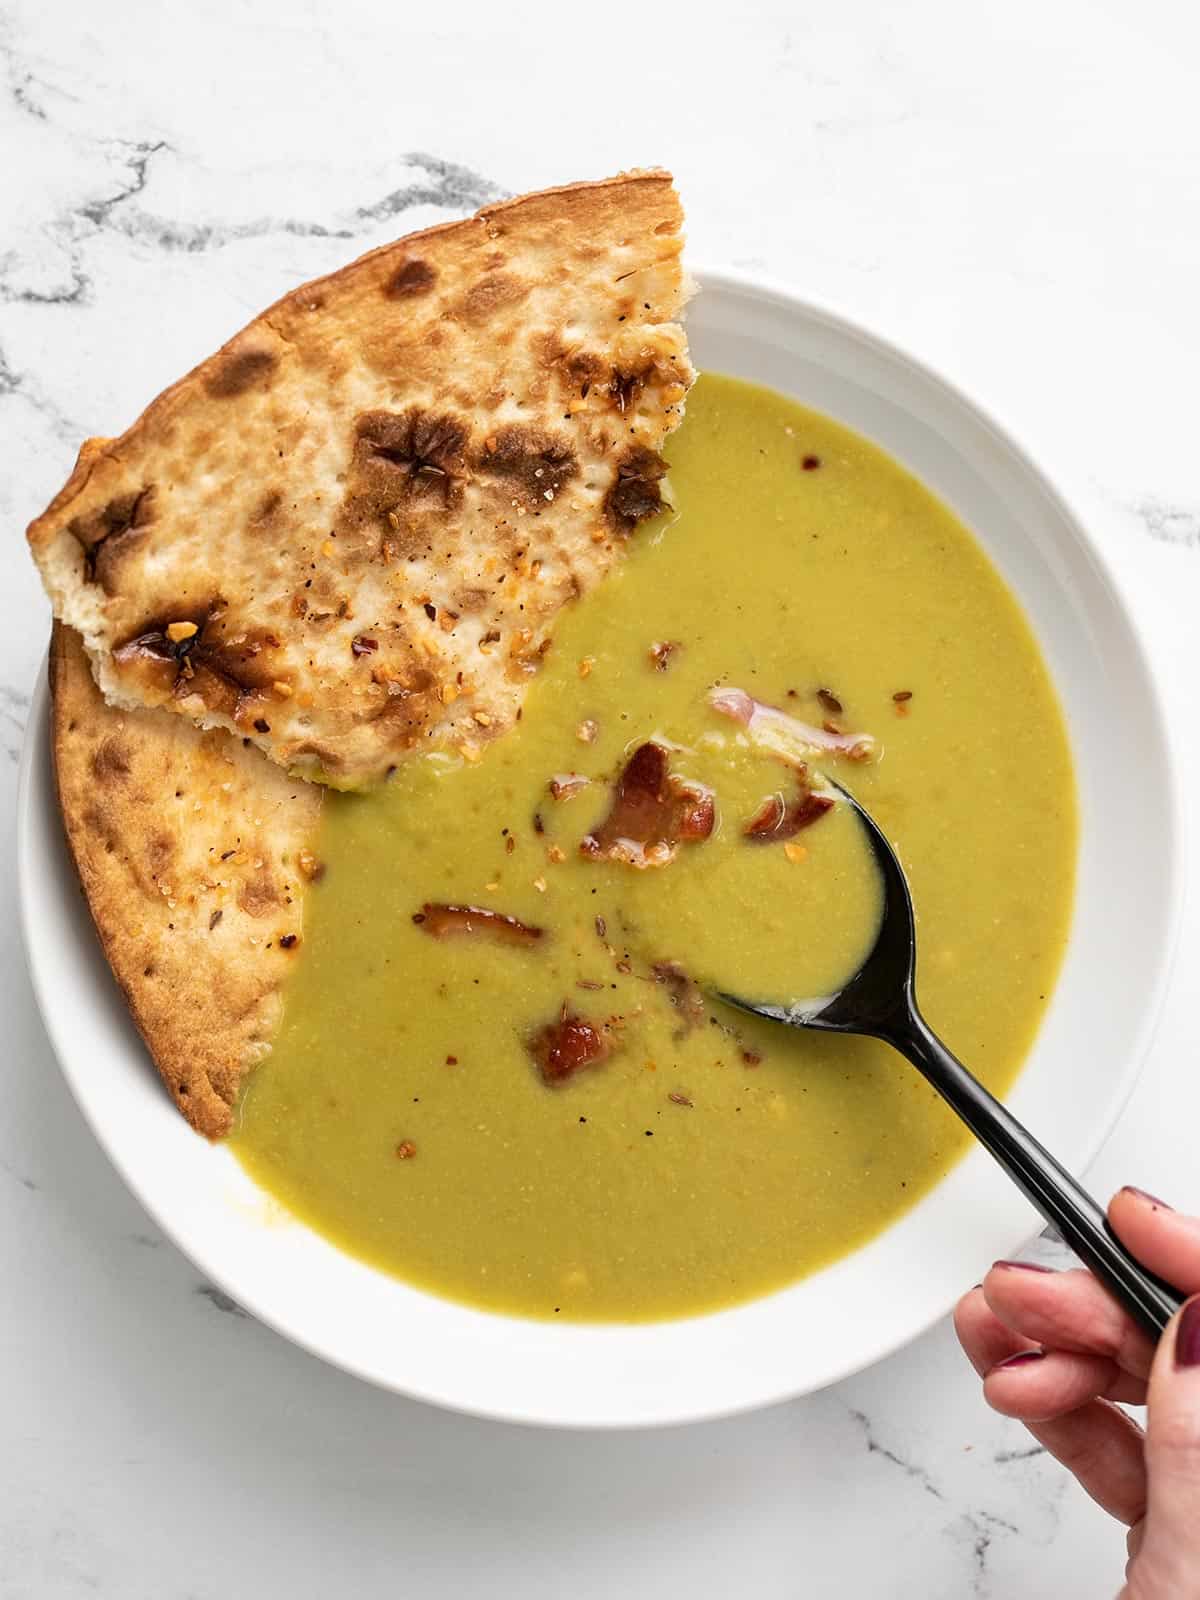 Overhead view of a bowl of split pea soup with flatbread and a spoon dipping into the center.